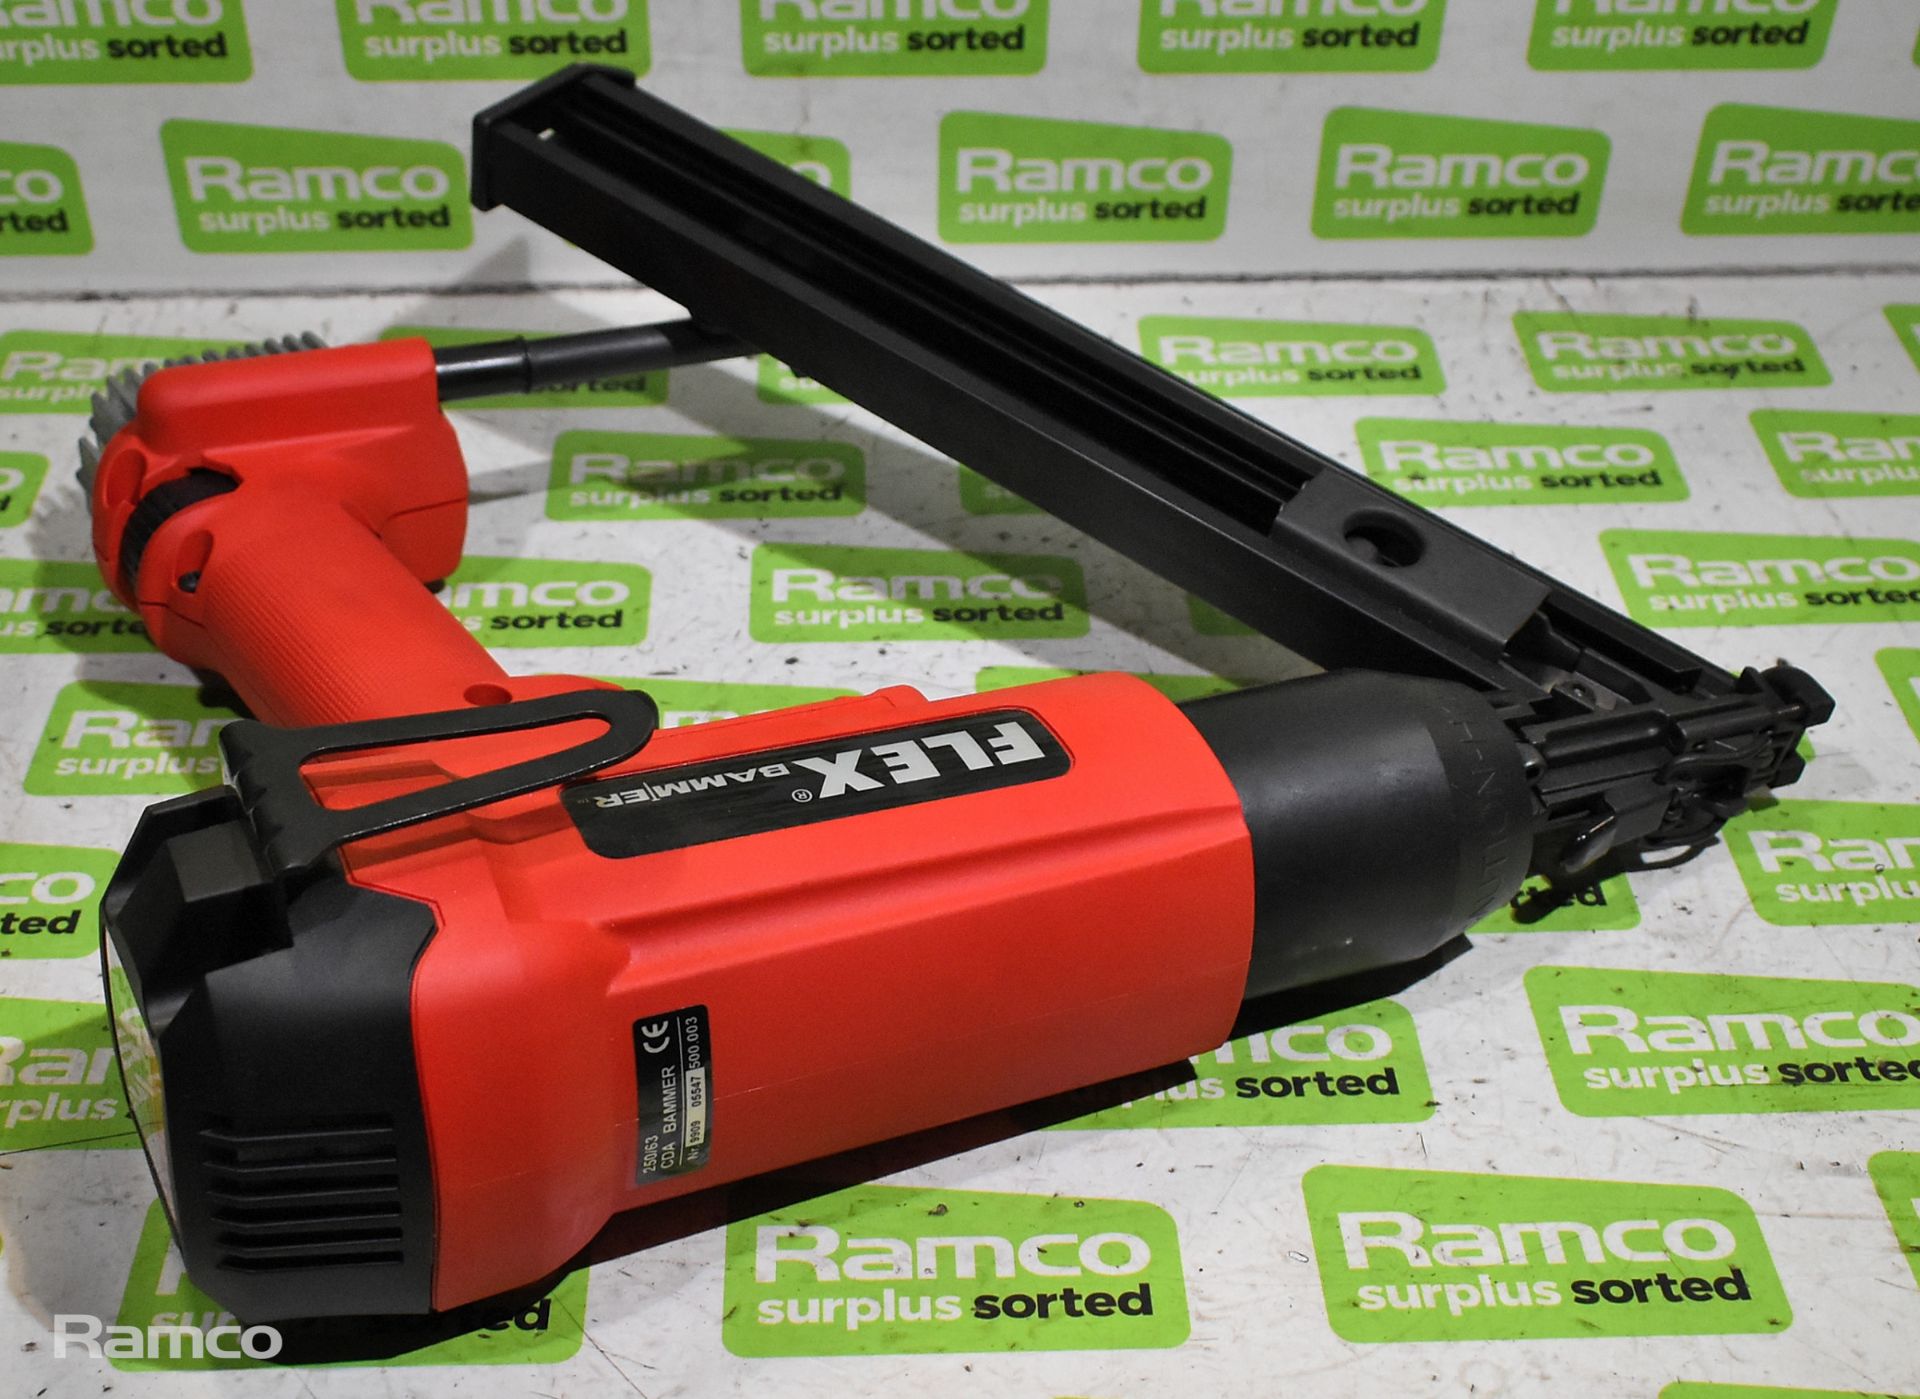 Flex bammer gas fueled nail gun with one gas cartridge in carry case - Image 4 of 7